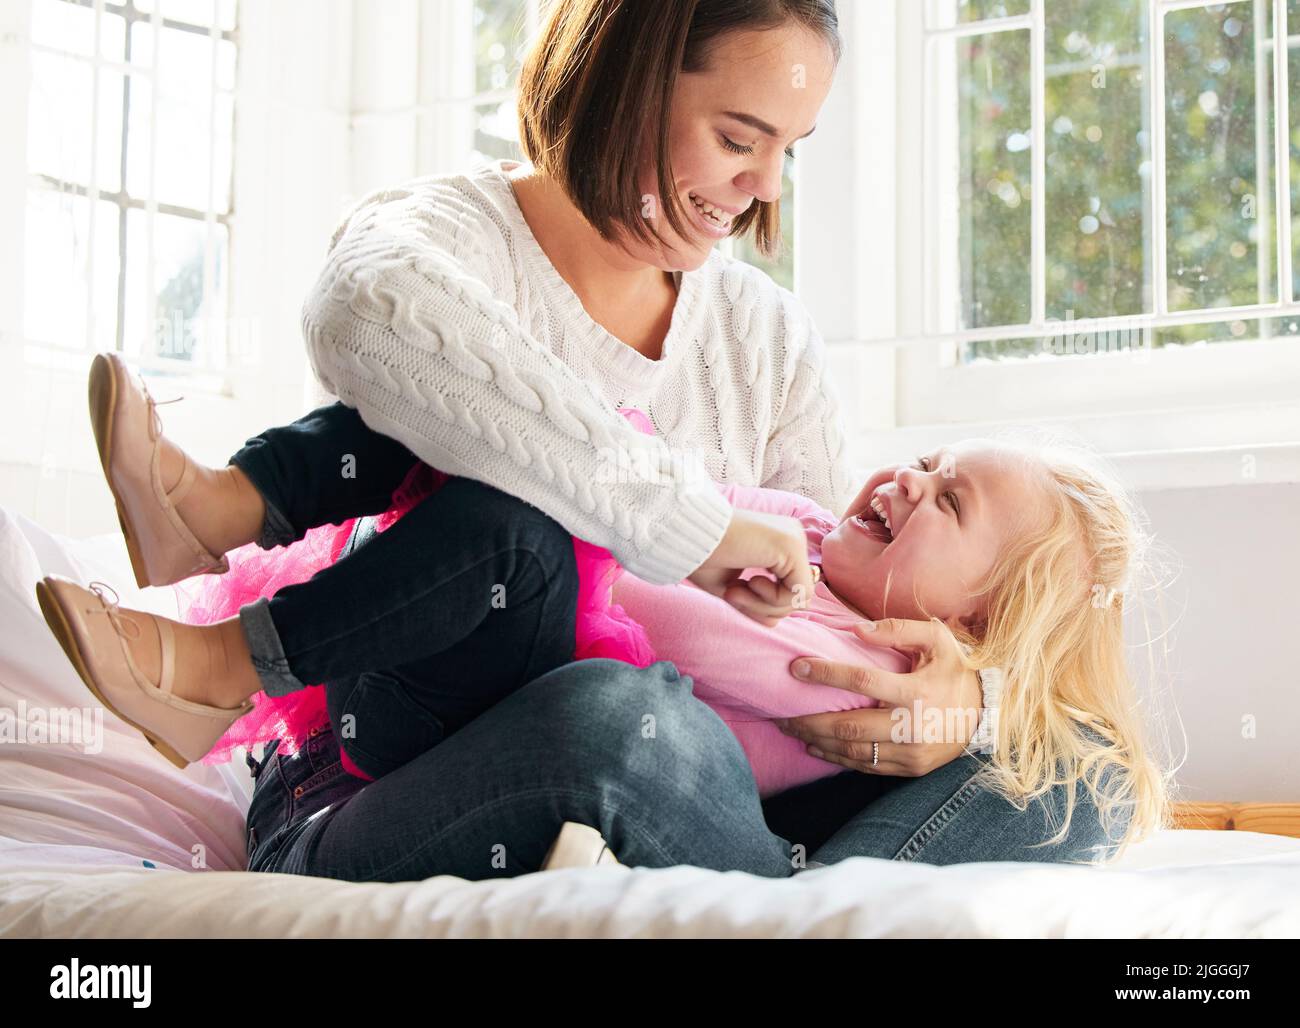 Seeing her smile makes me so happy. a young mother and daughter spending time together at home. Stock Photo